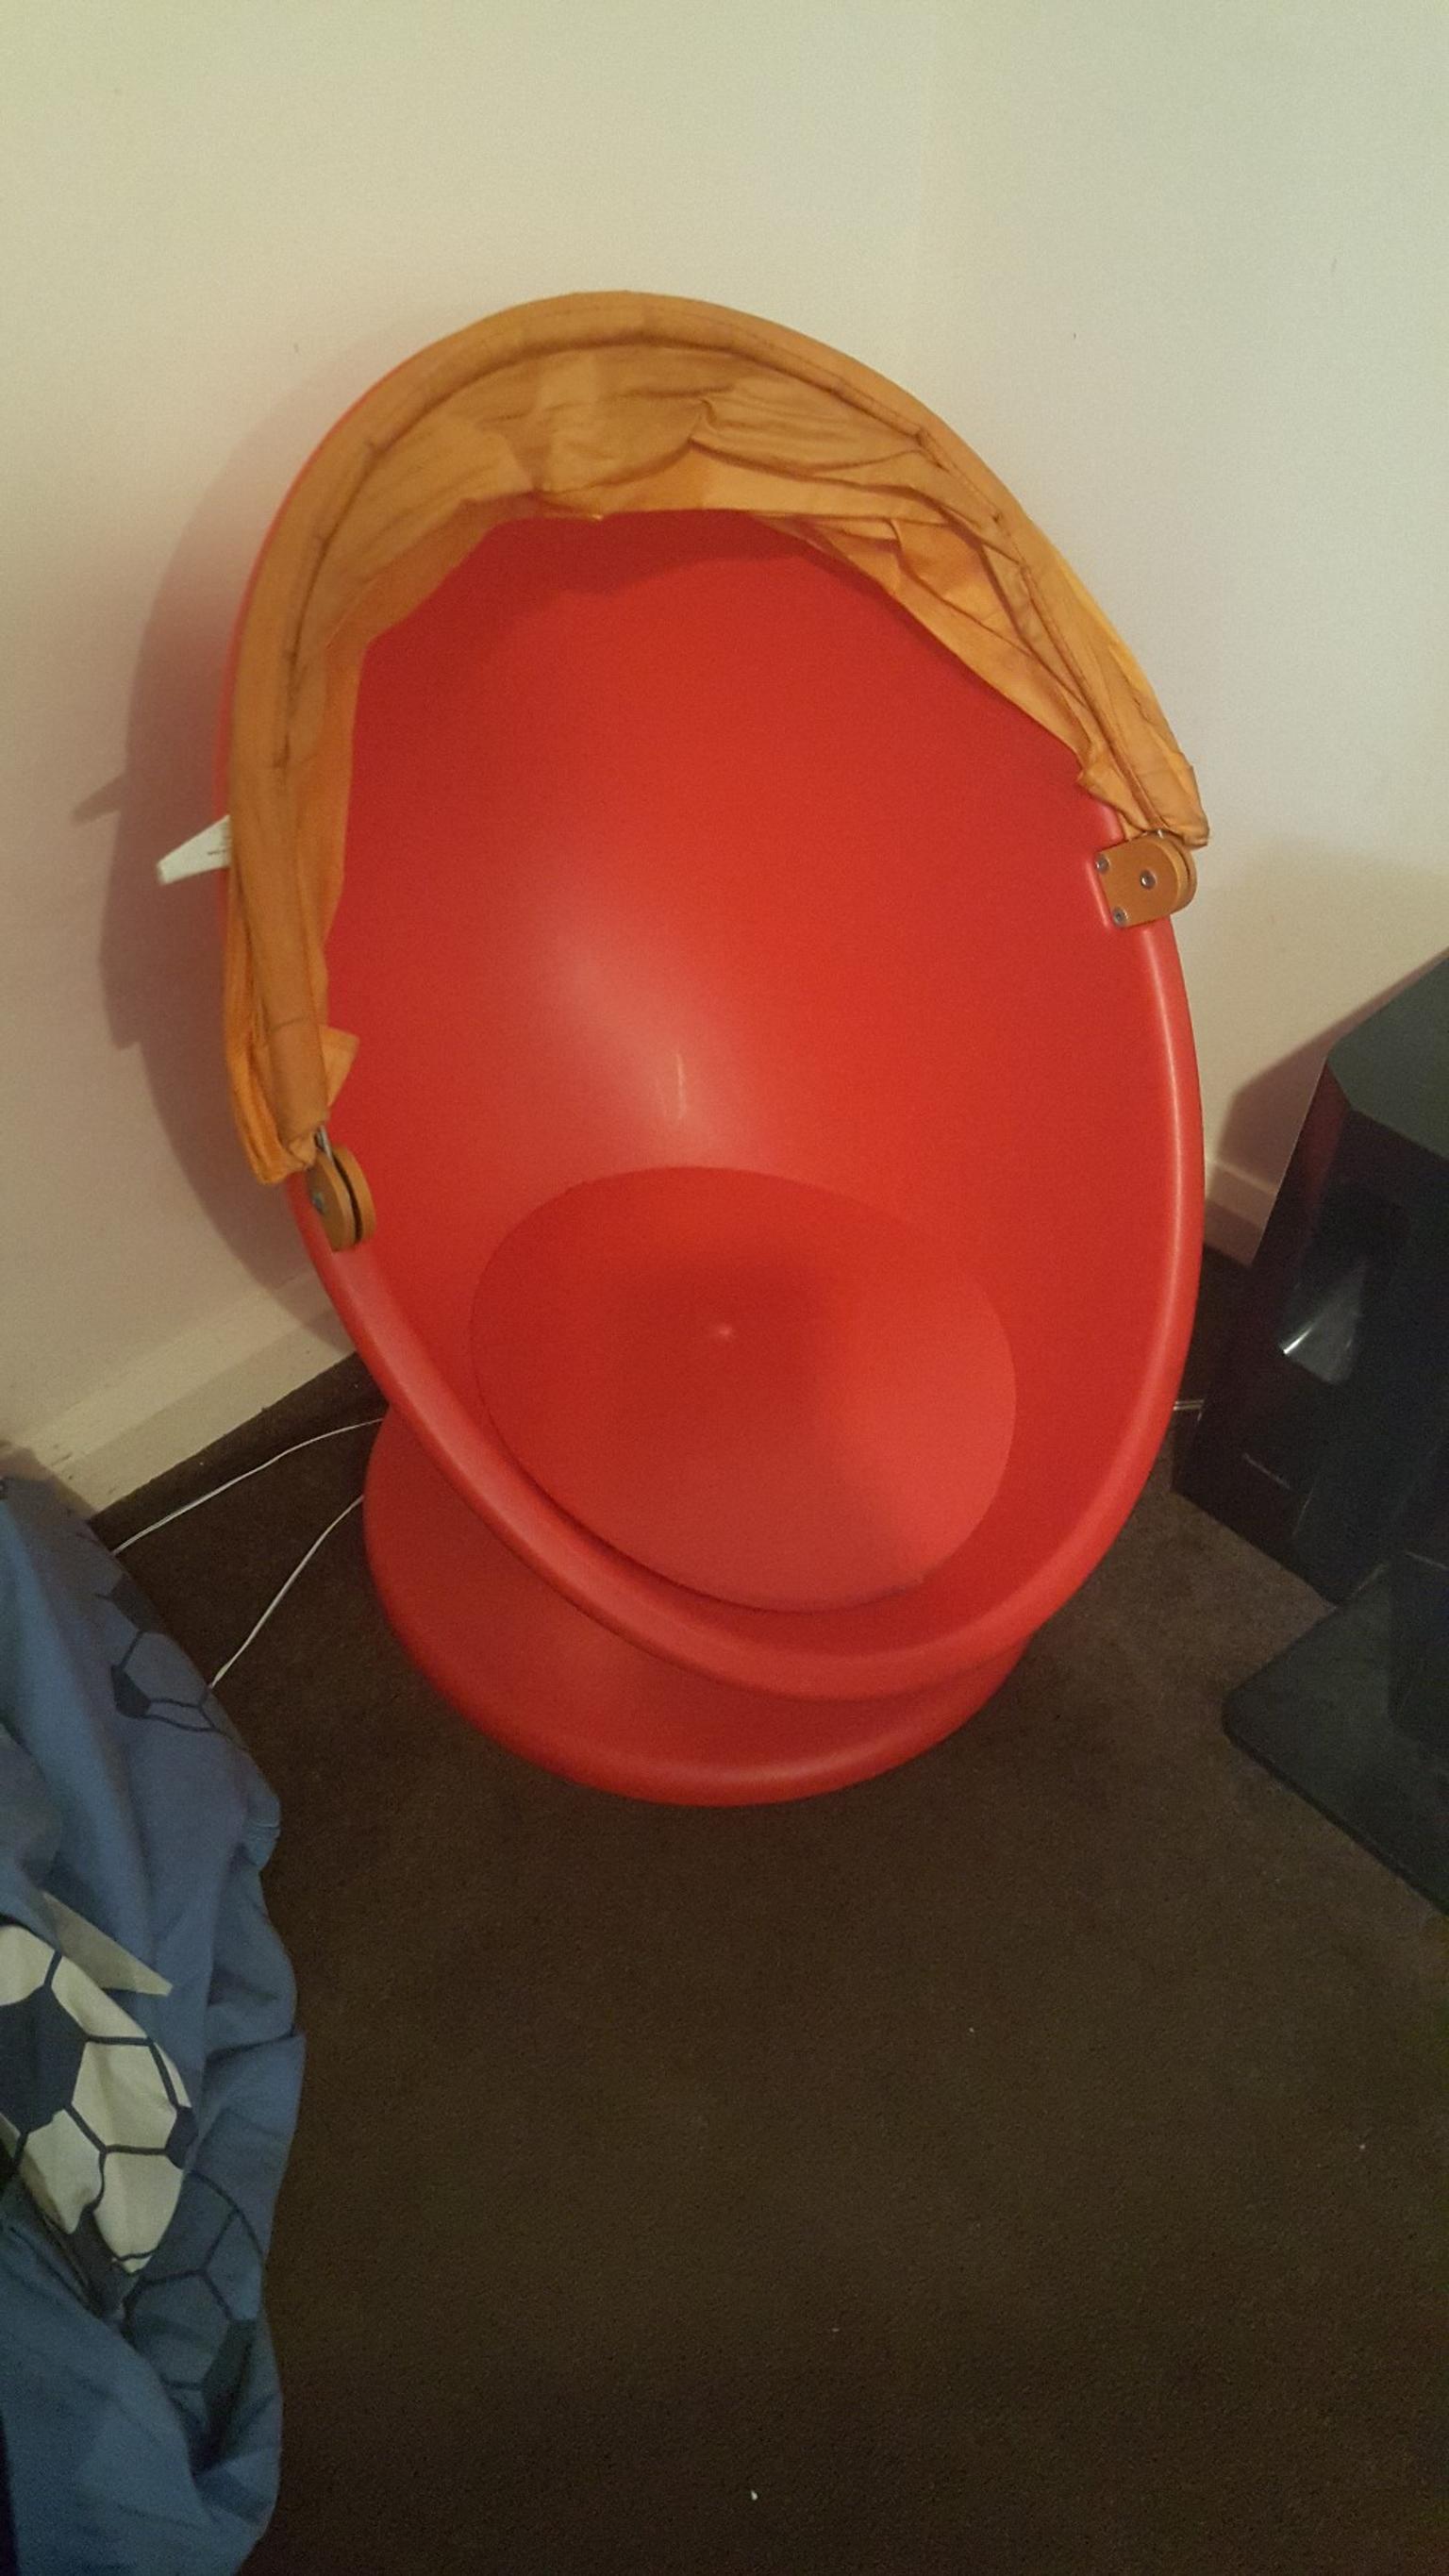 Kids Ikea Egg Chair In Cv11 Nuneaton For 20 00 For Sale Shpock